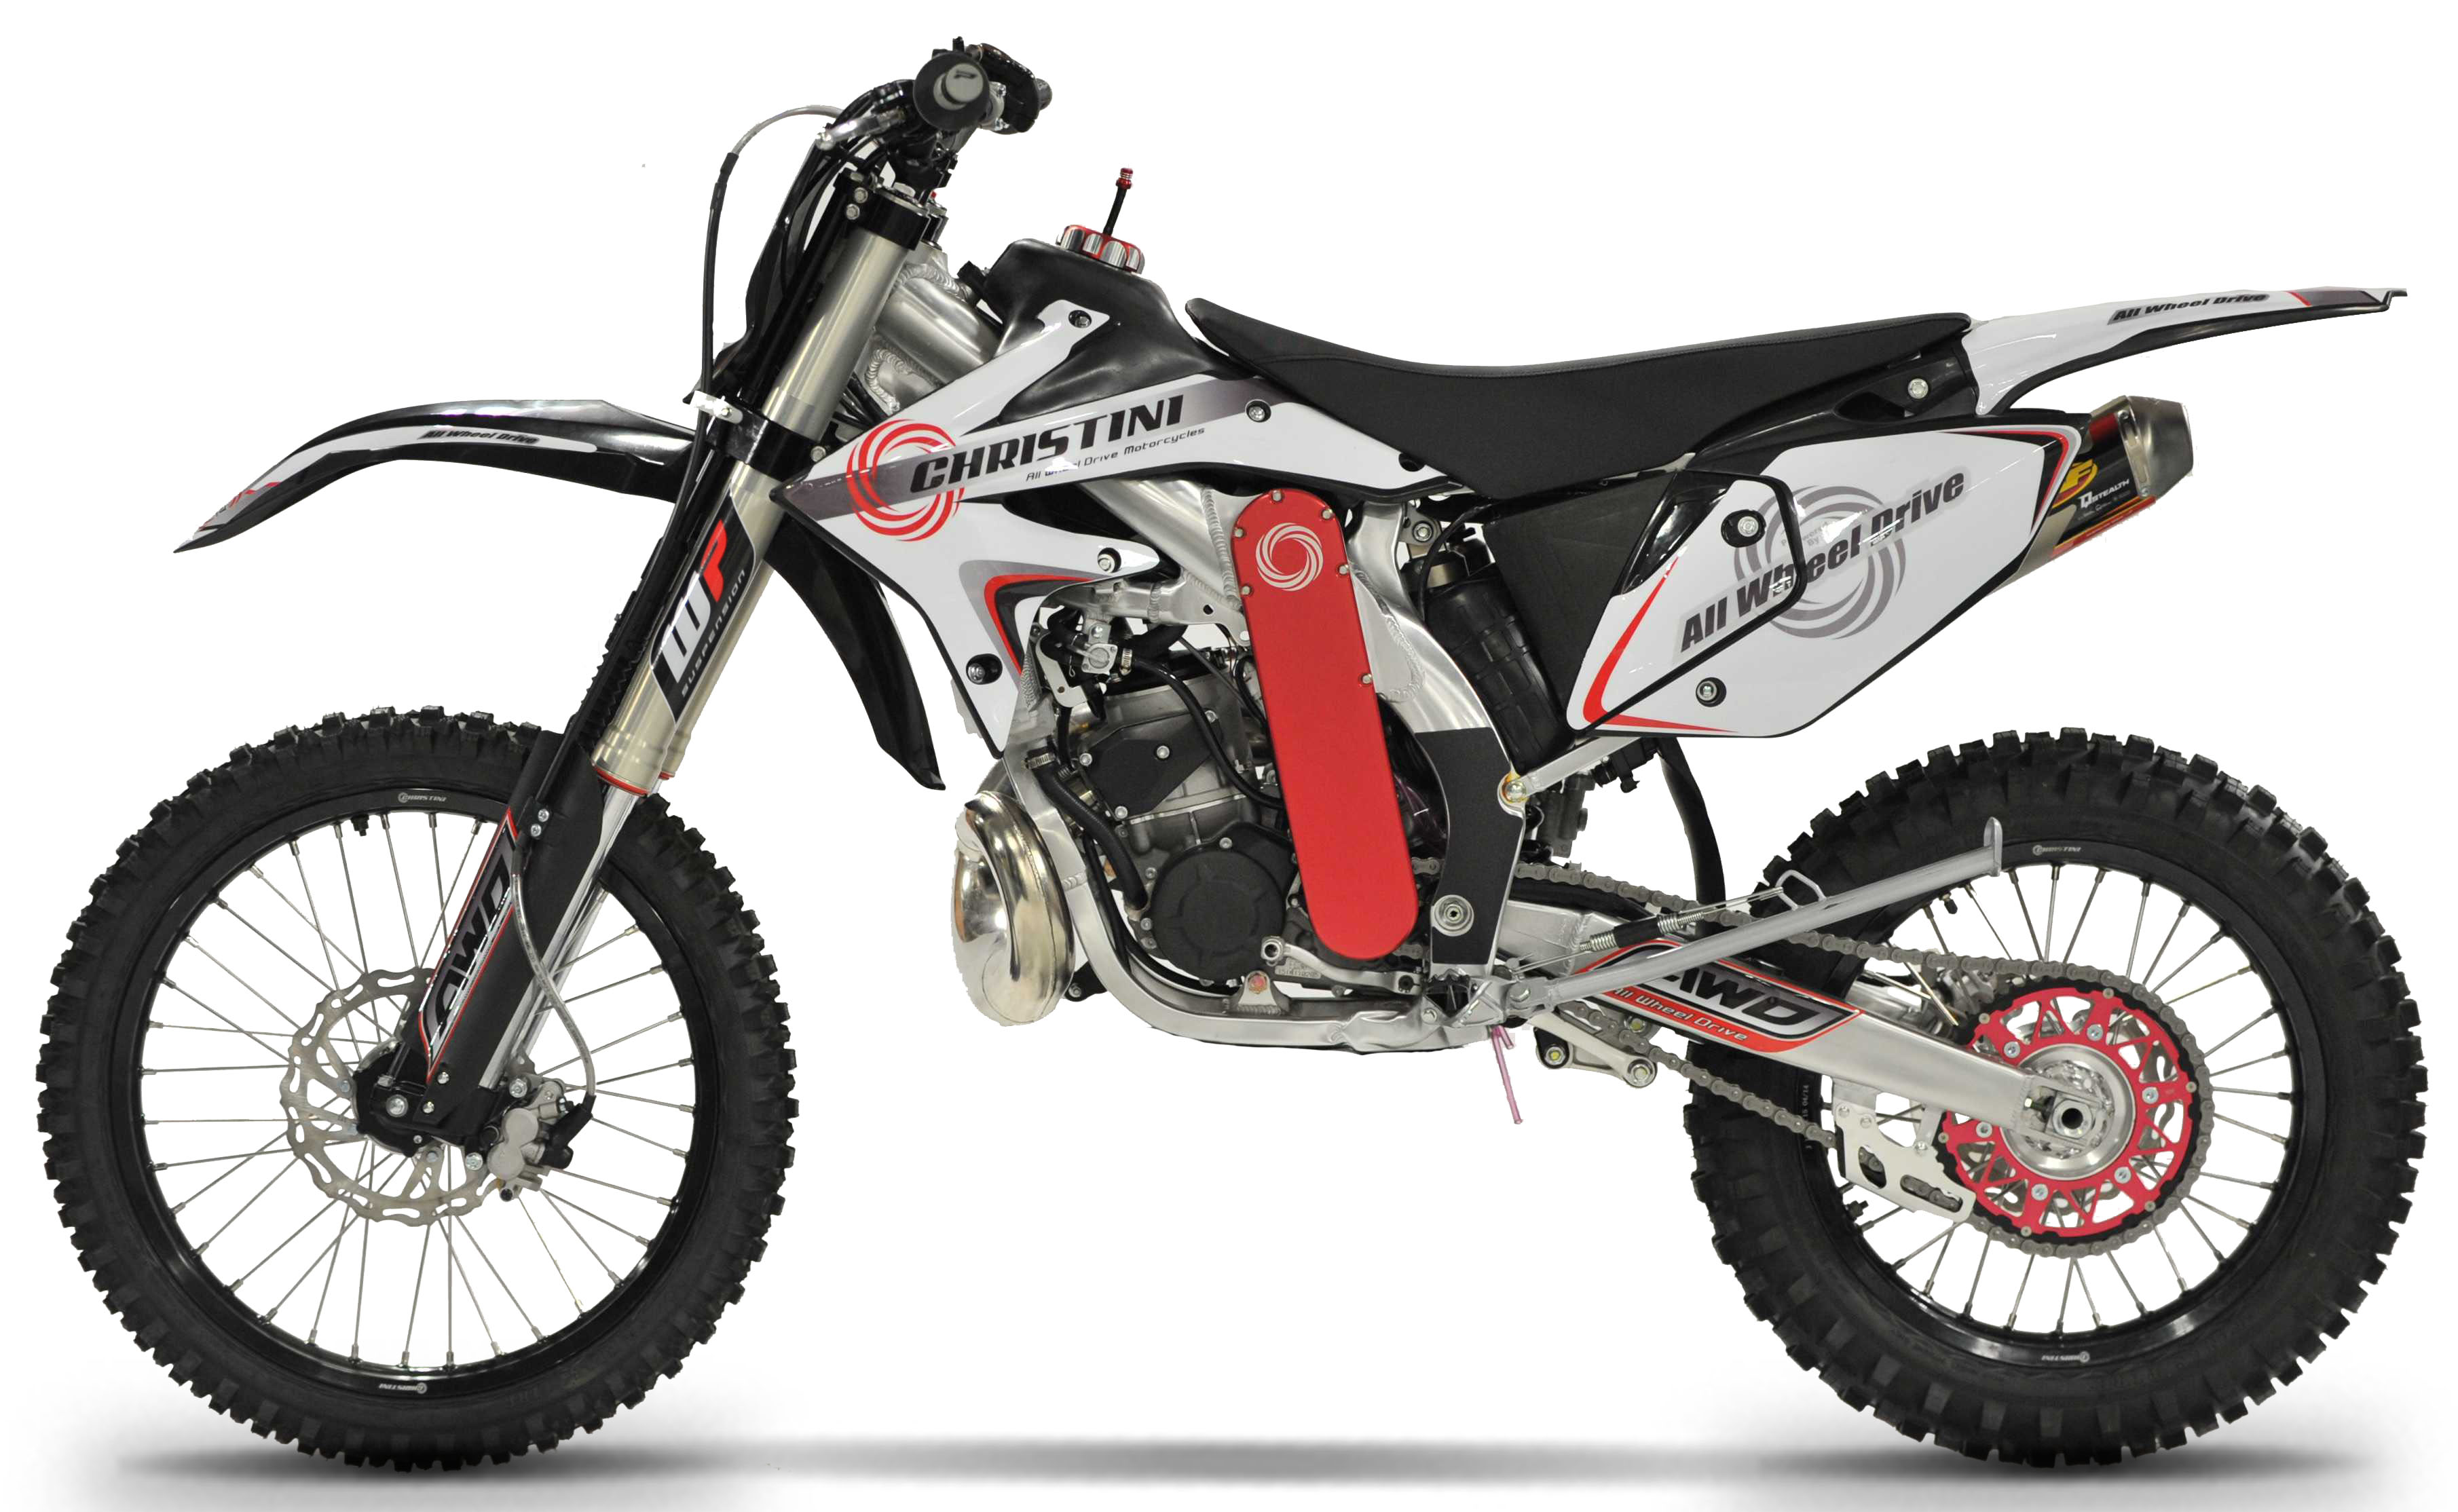 45+ Exciting Awd dirt bike image ideas